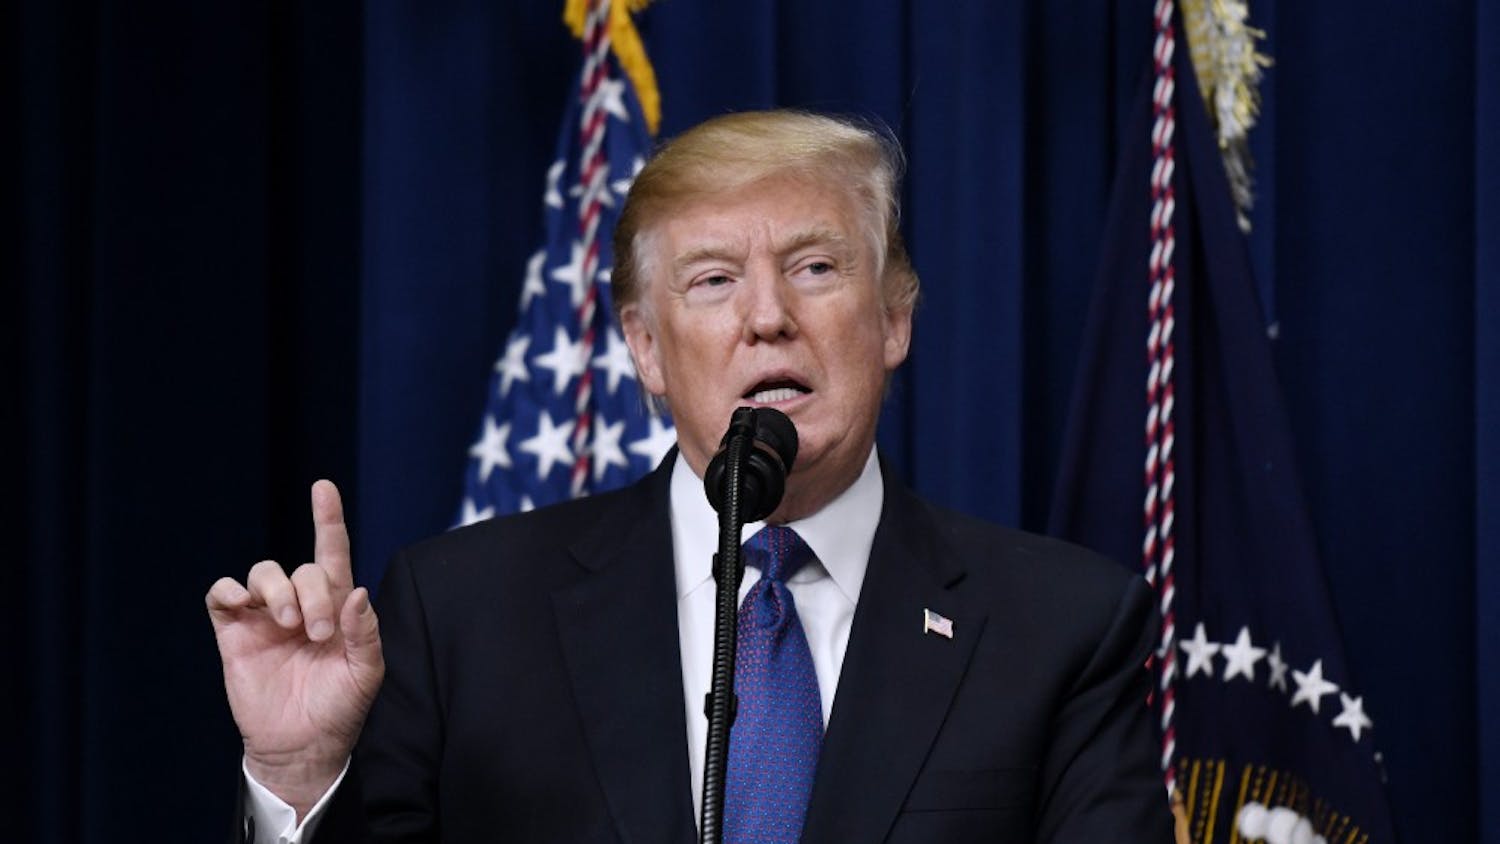 U.S. President Donald Trump speaks at the "Conversations with the Women of America" event in the EEOB building  of the White House Jan. 16, 2018 in Washington, D.C. (Olivier Douliery/Abaca Press/TNS) 